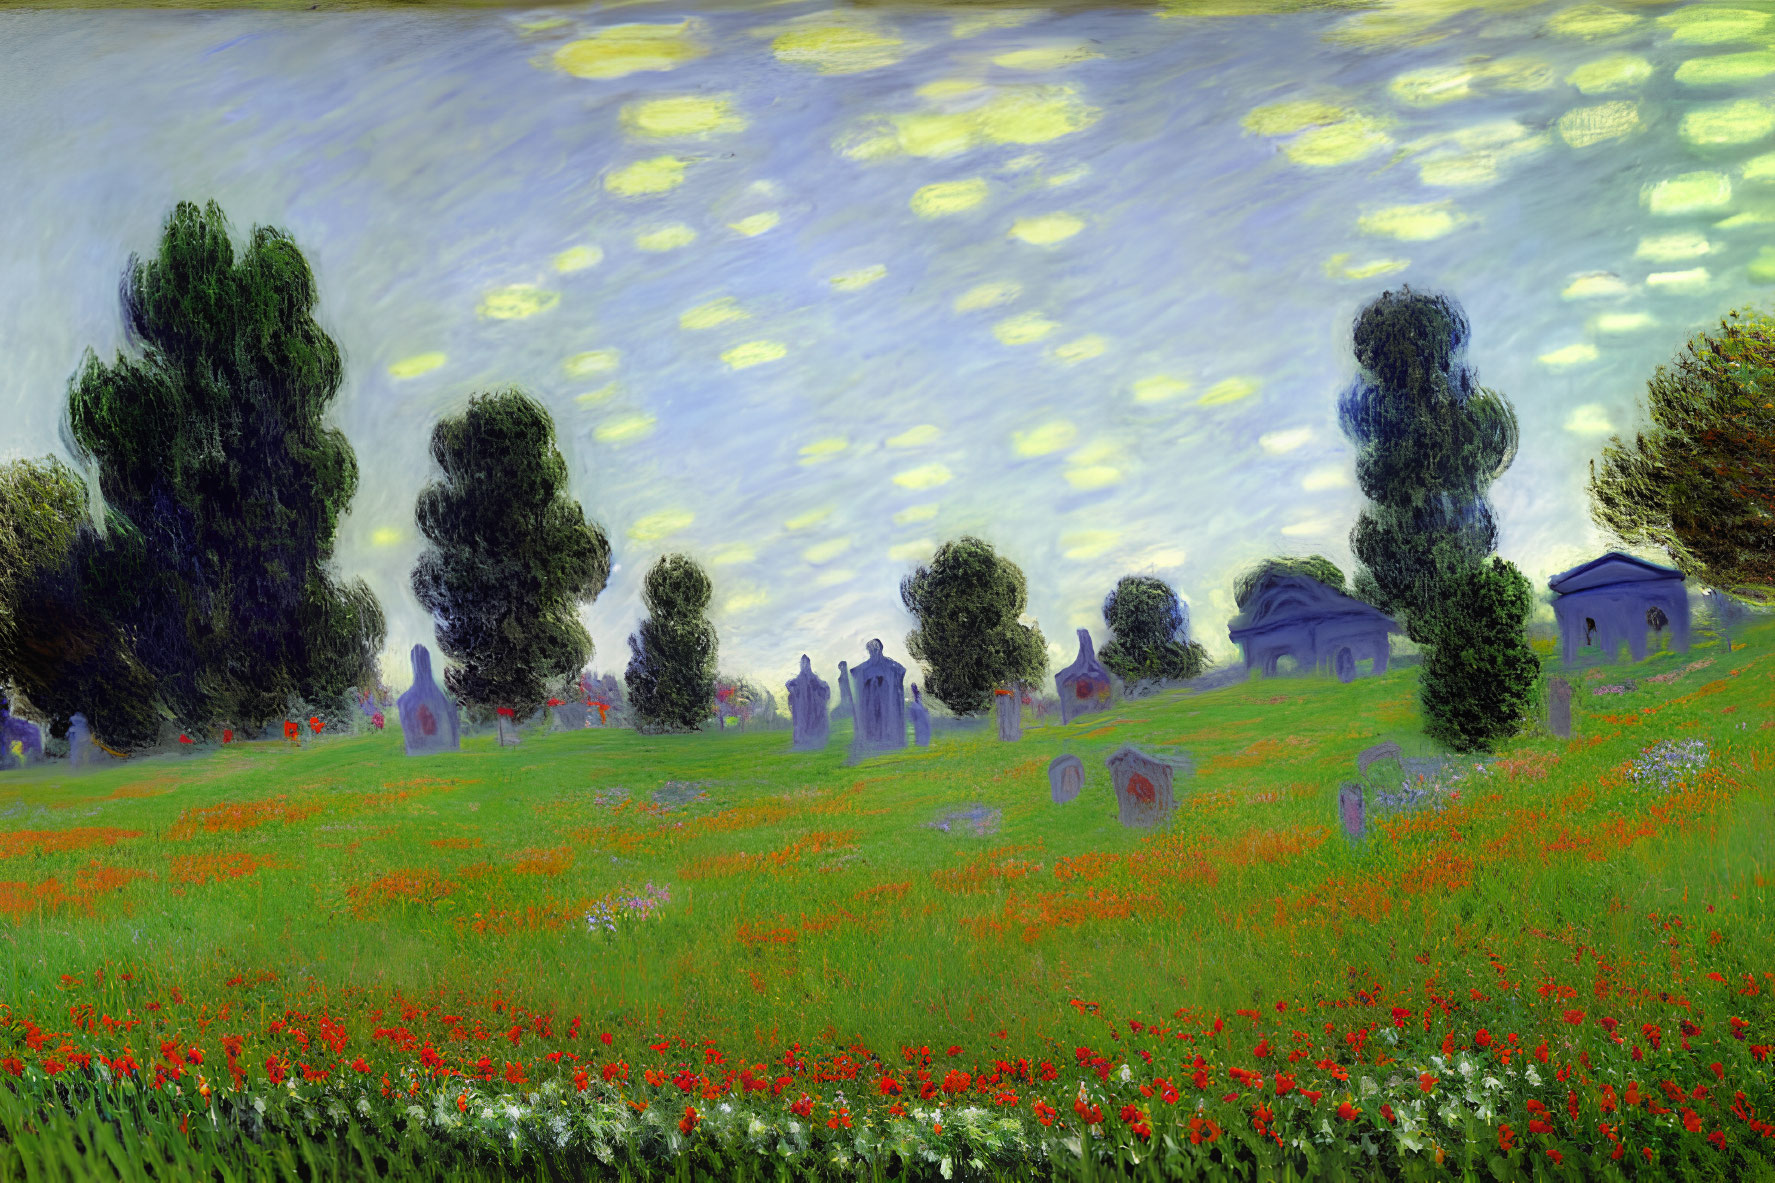 Impressionist-style painting of field with red flowers, green trees, blue sky with yellow patterns